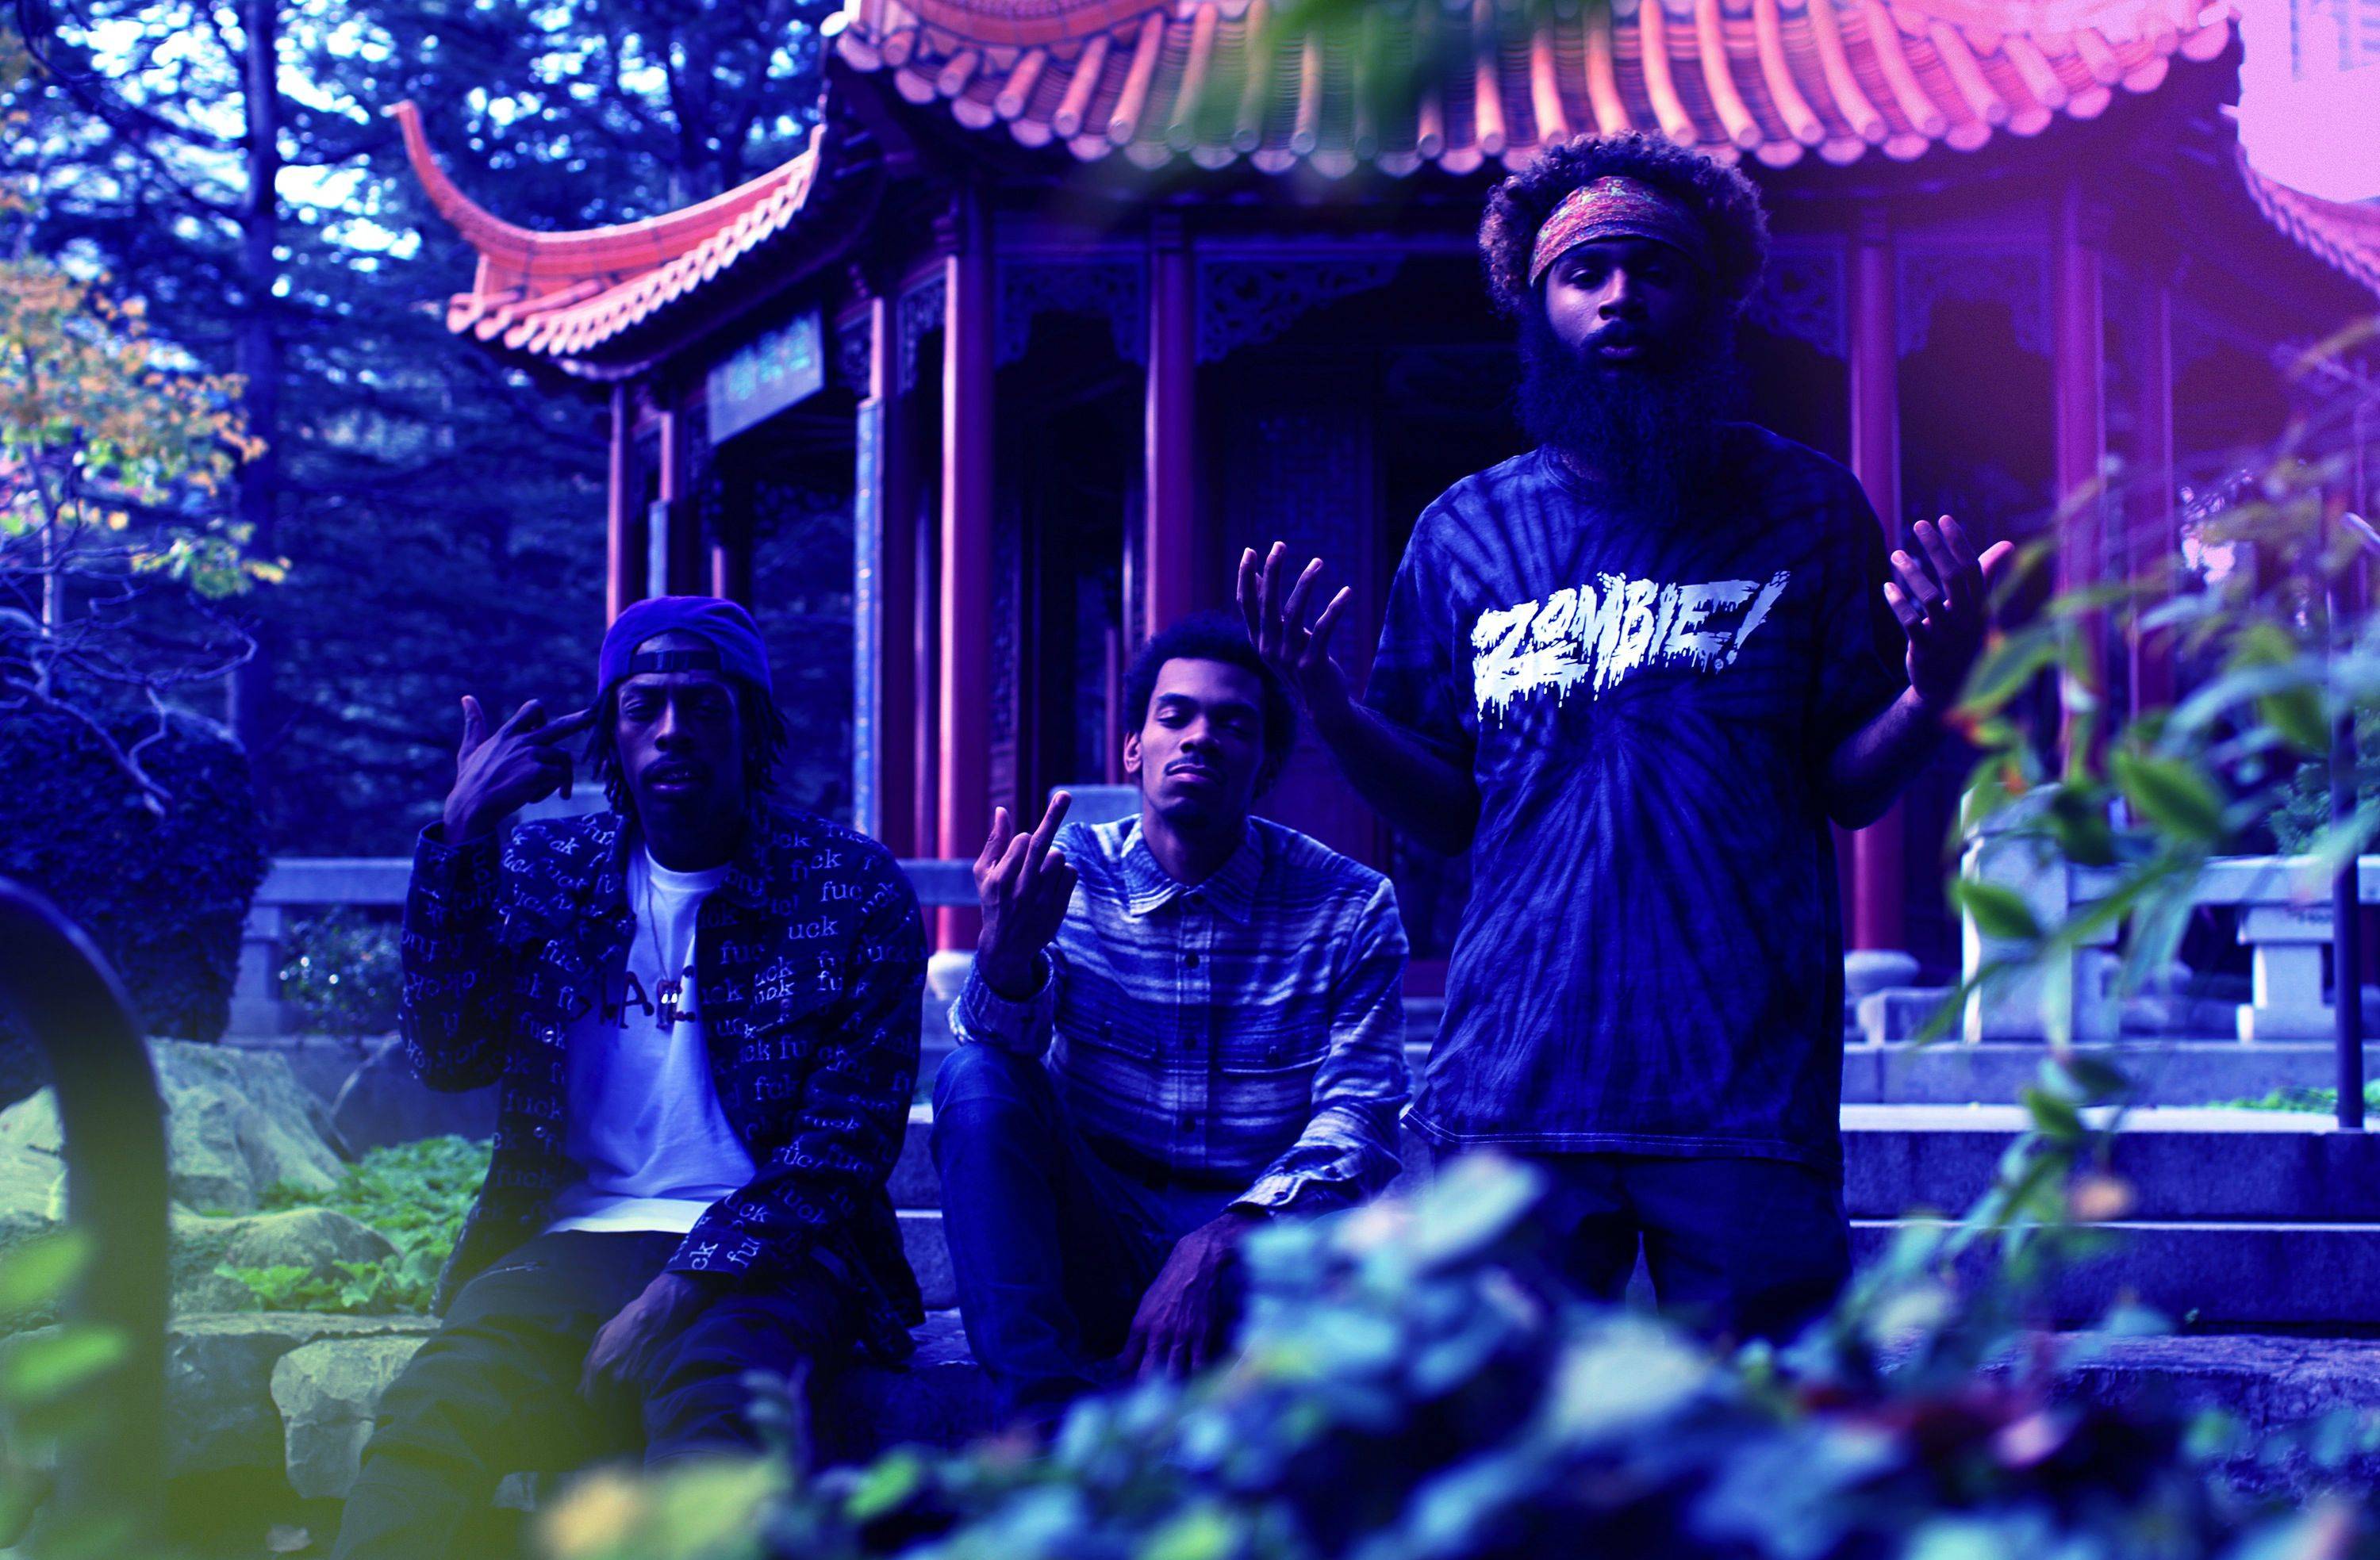 Flatbush Zombies or The Underachievers wallpaper?